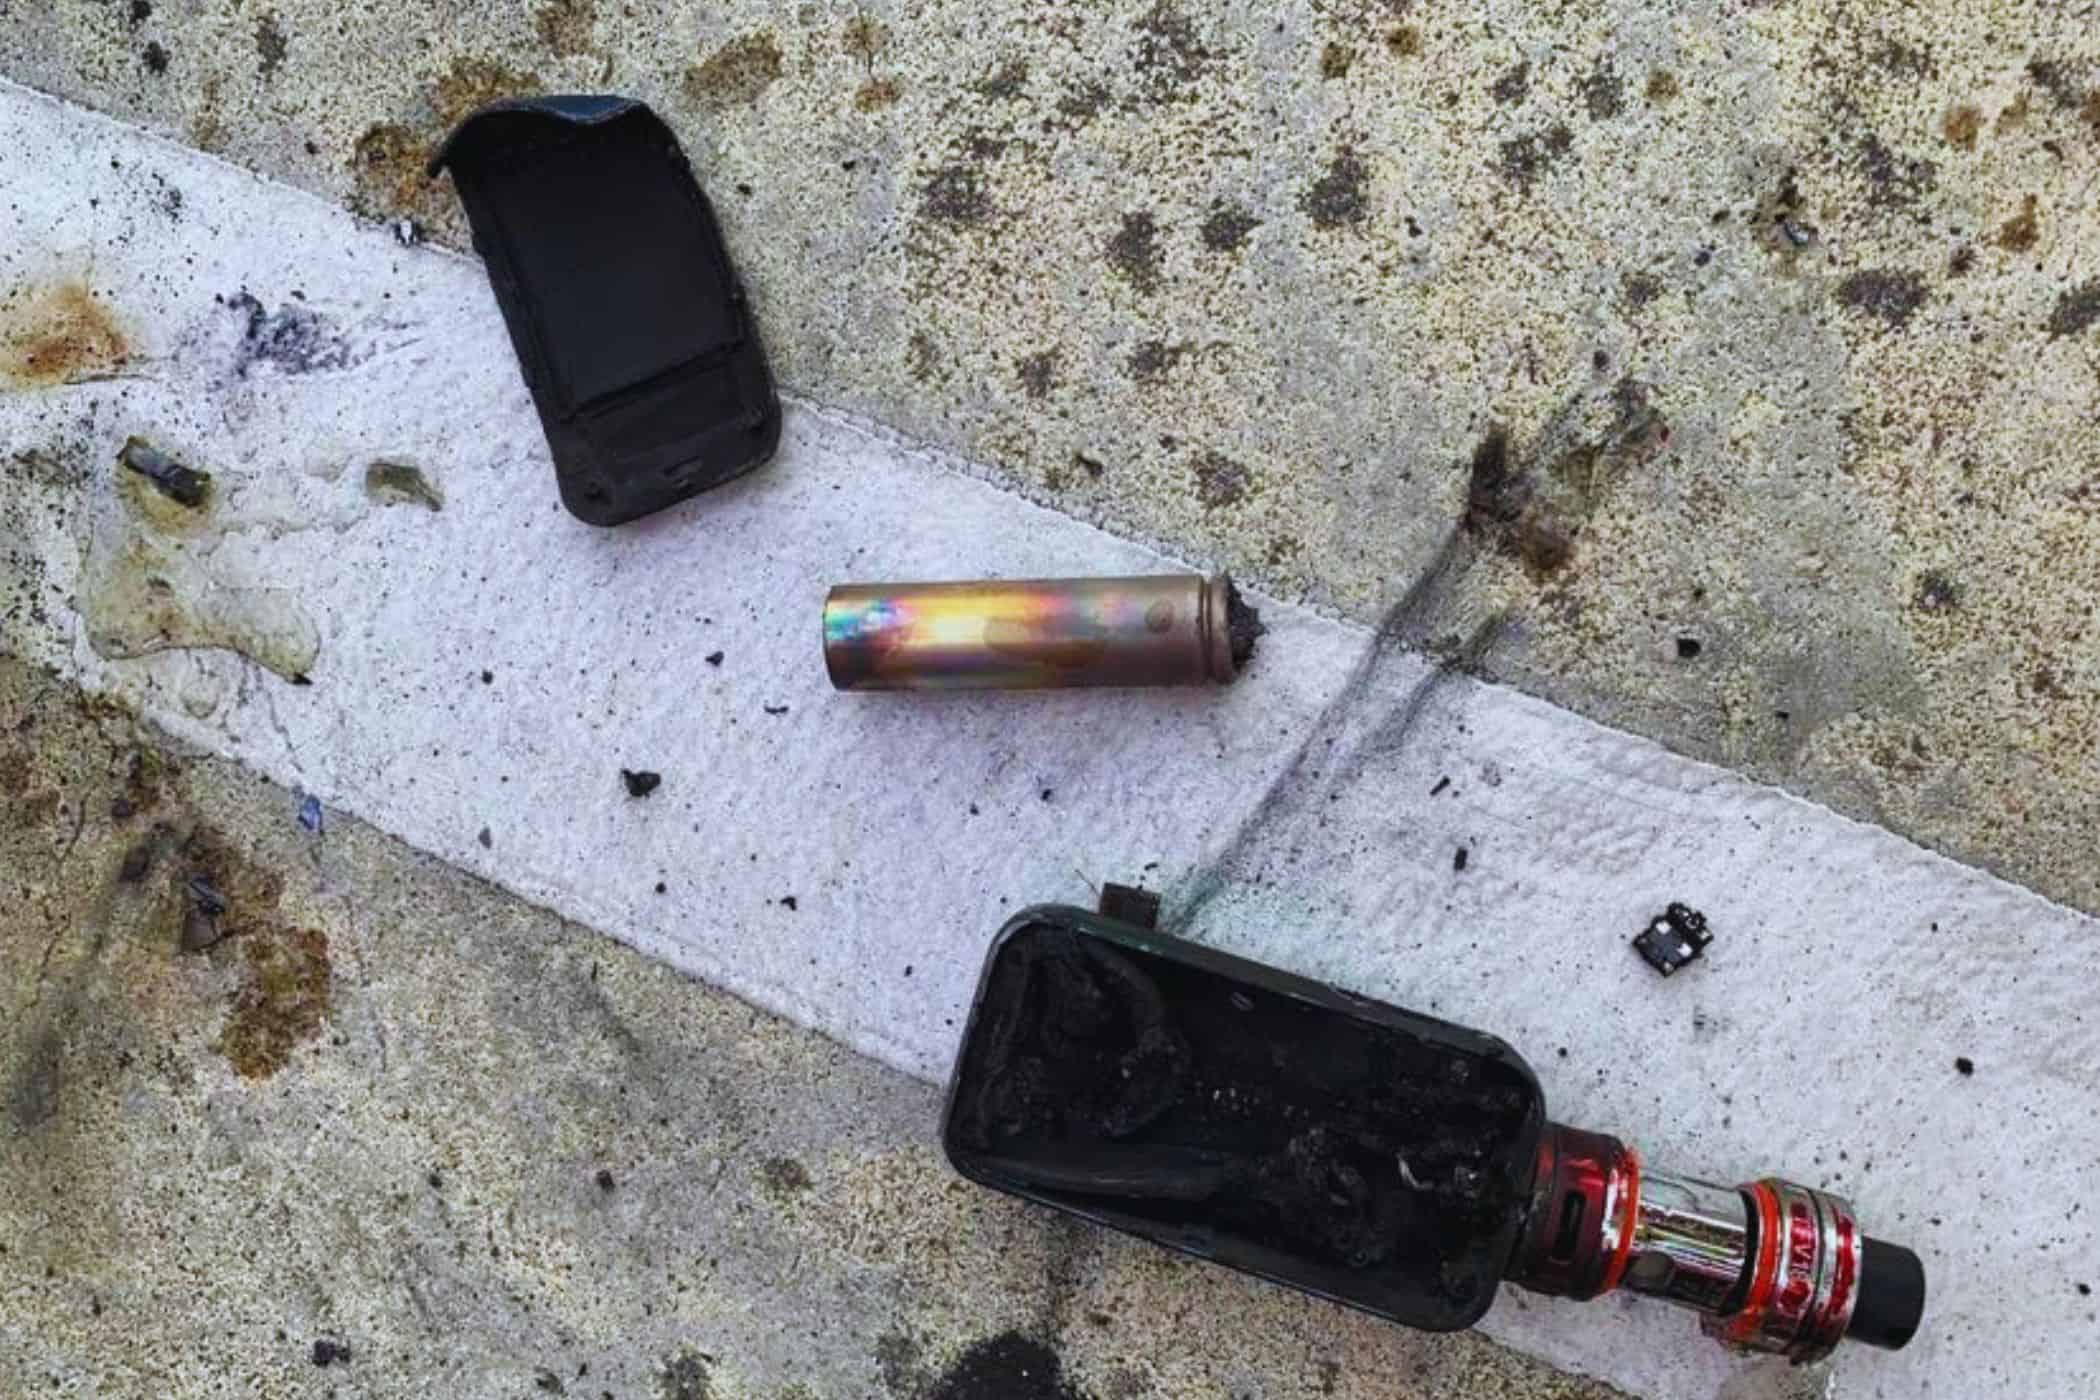 Vaping device exploded